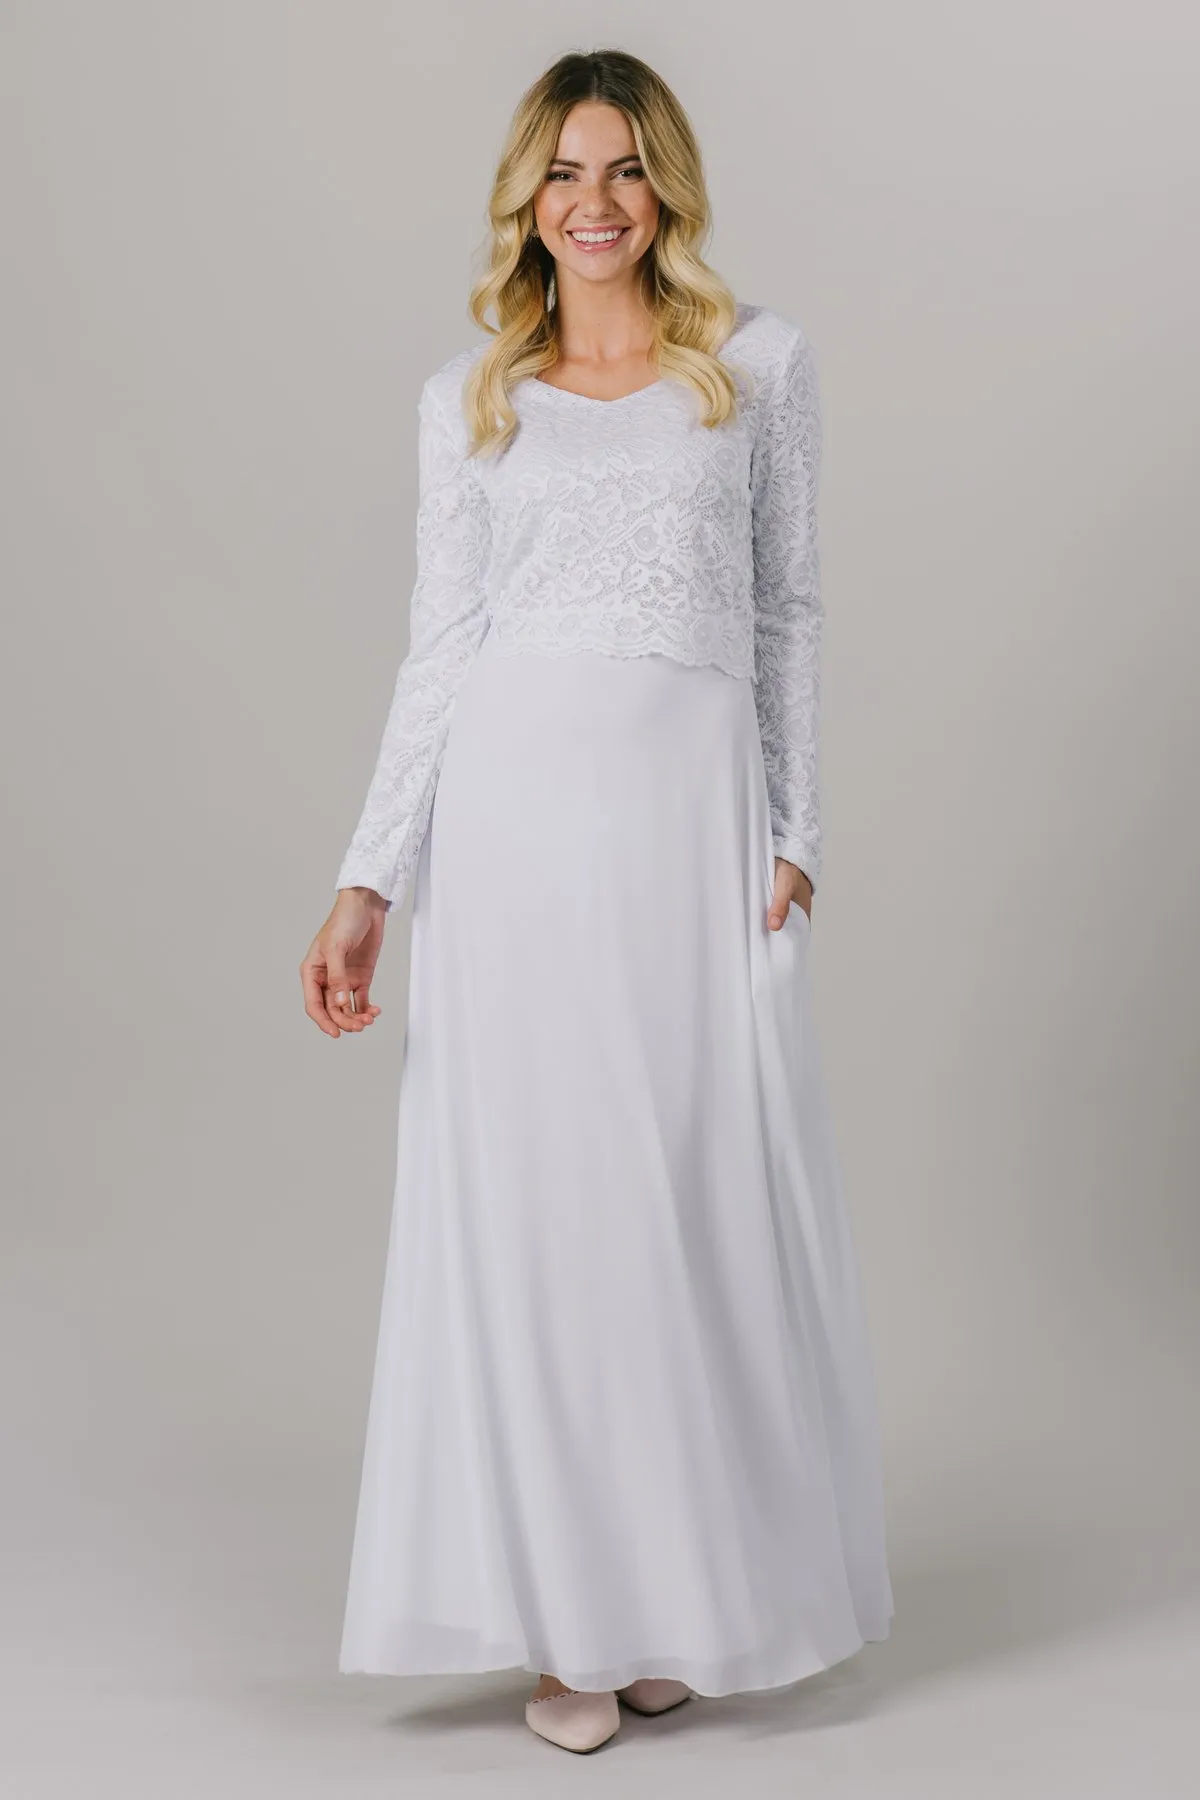 A-line Chiffon Lace Temple Wedding Dresses Bridal Gowns Long Sleeves V Neck Floor Length Modest bride Dress With Pockets